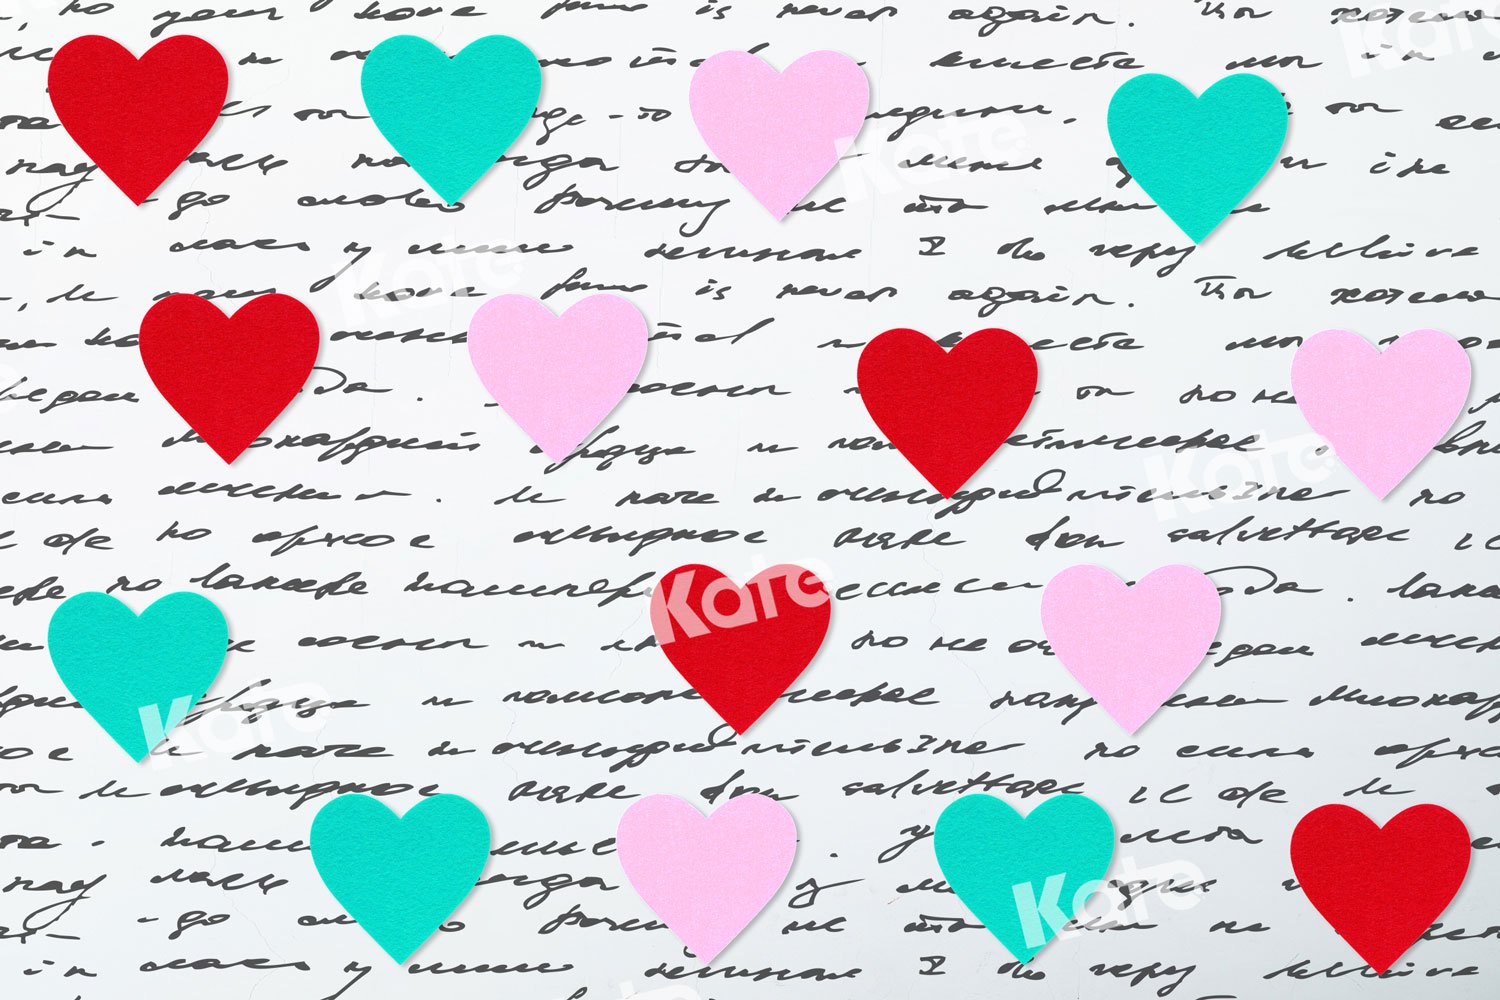 Kate Valentine's Day Love Words Wall Backdrop for Photography